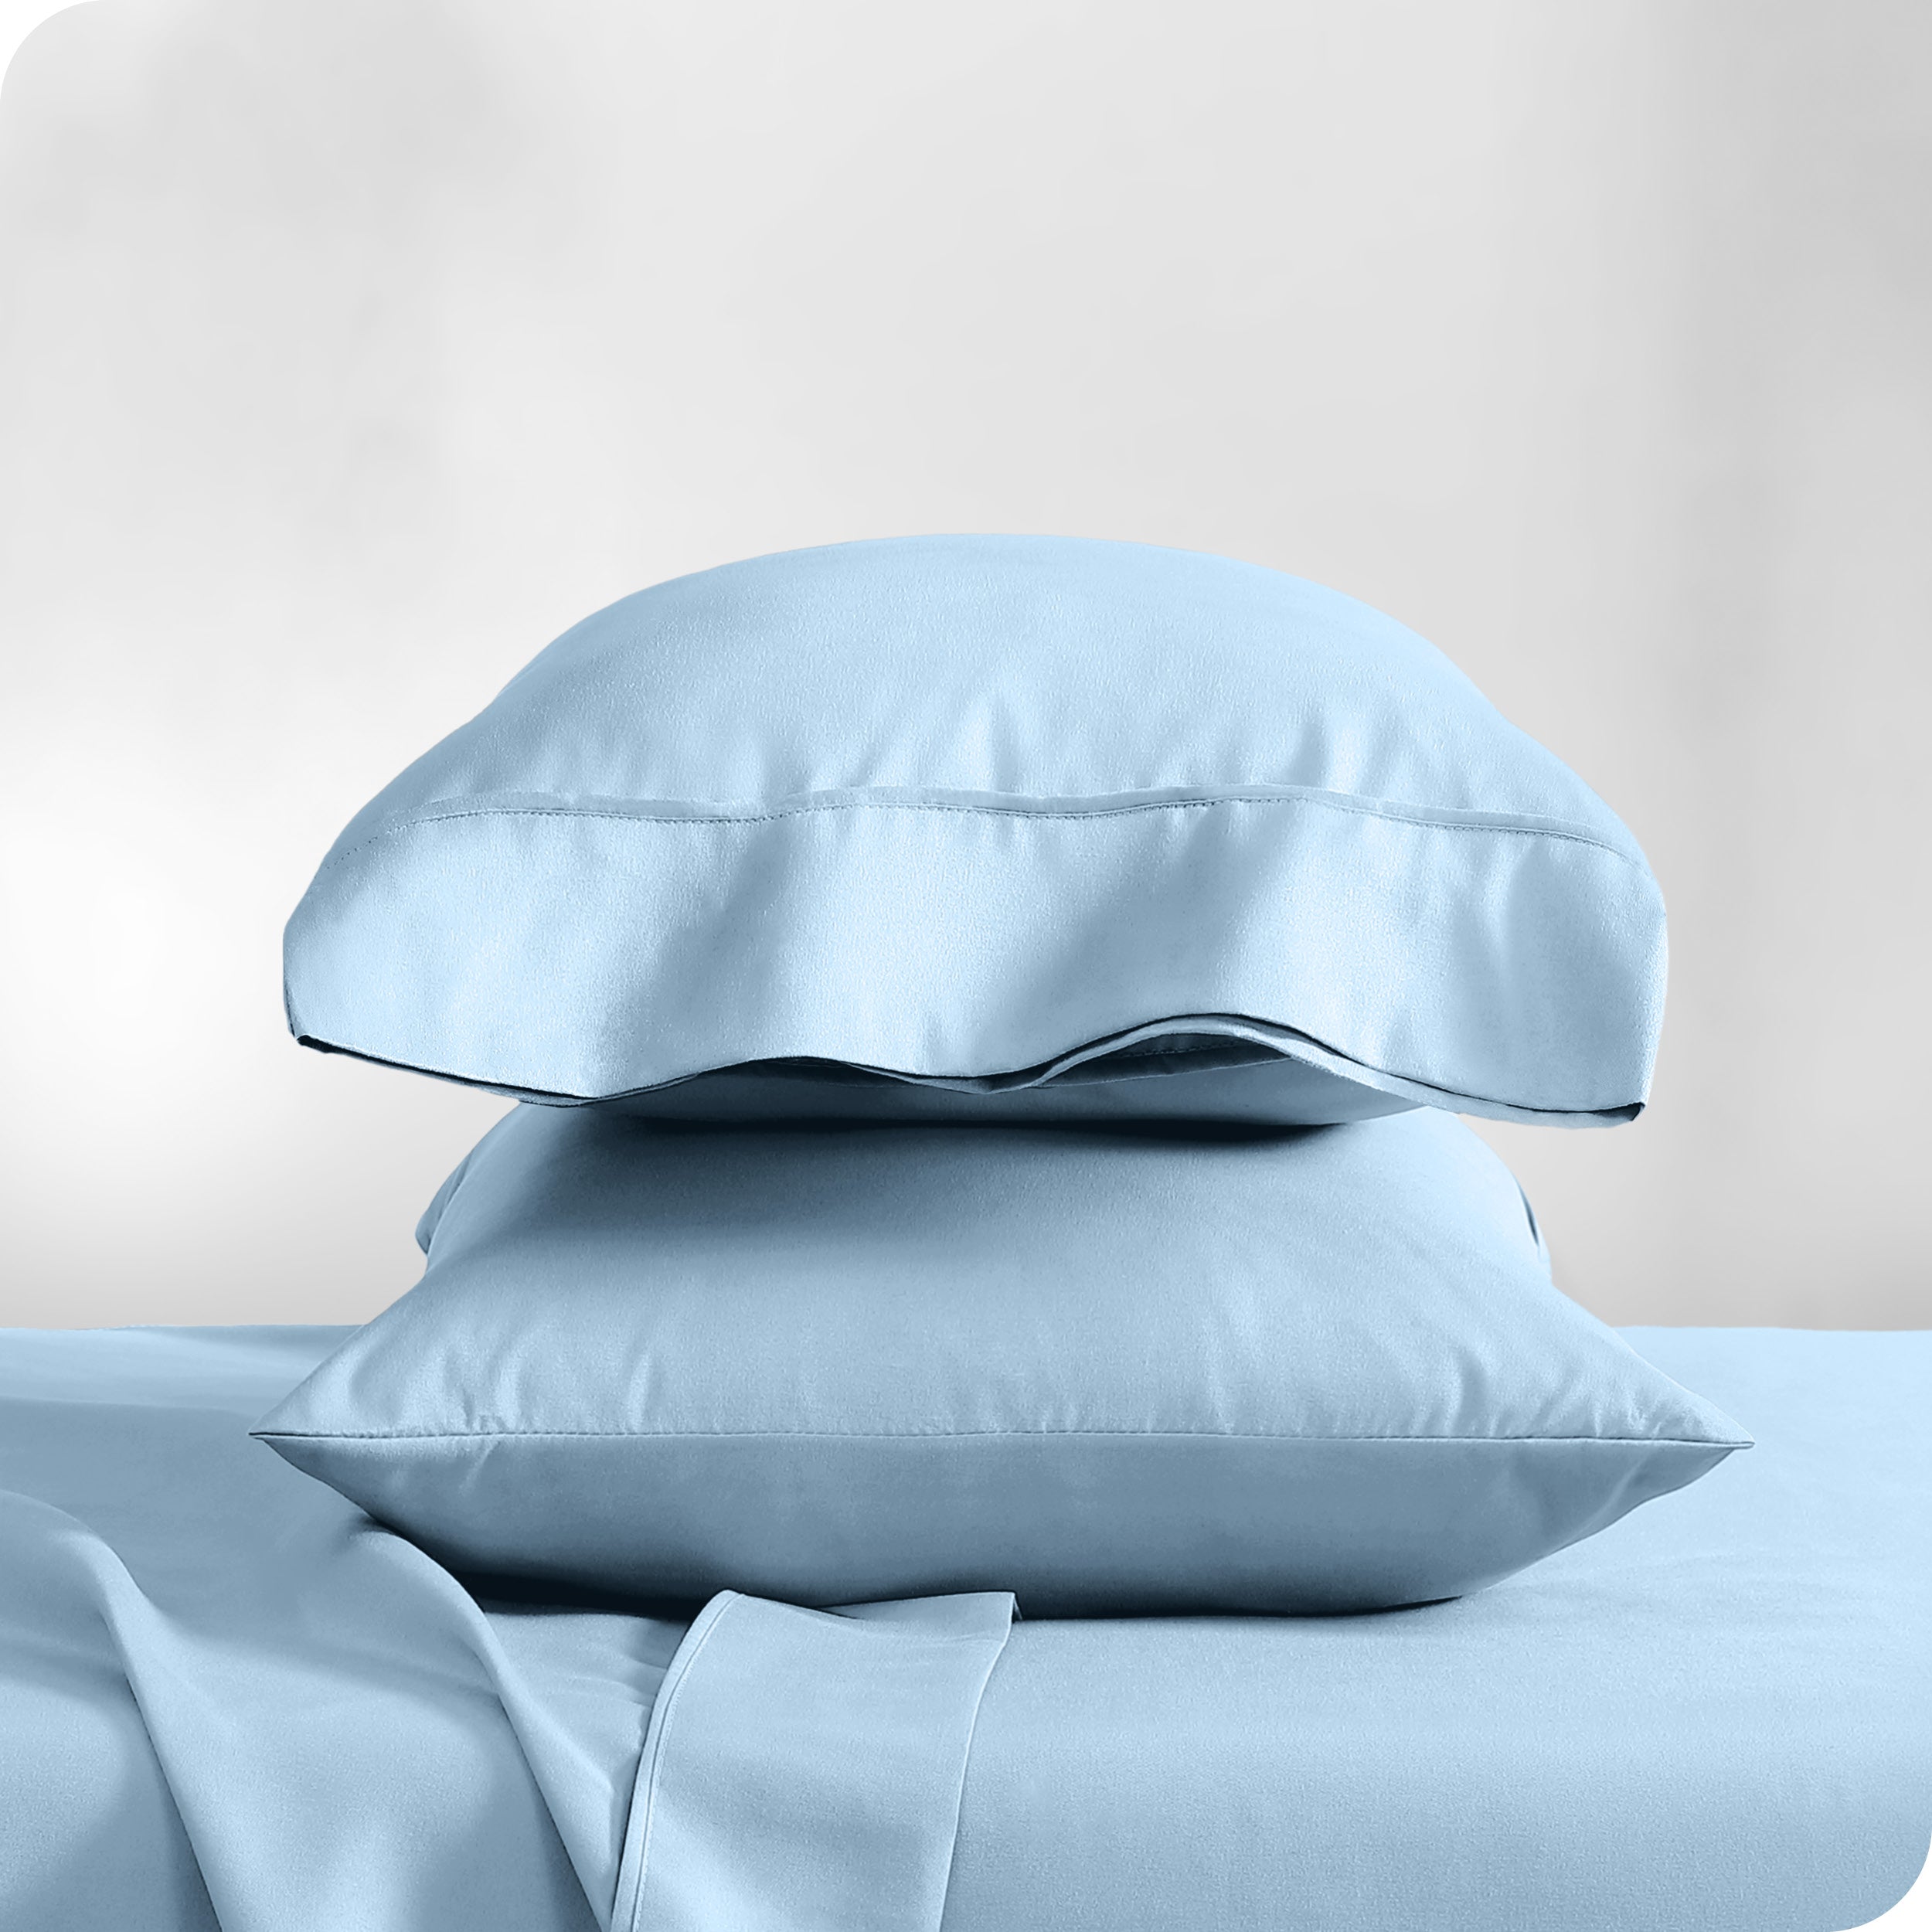 Two pillowcases on pillows stacked on a bed with matching sheets